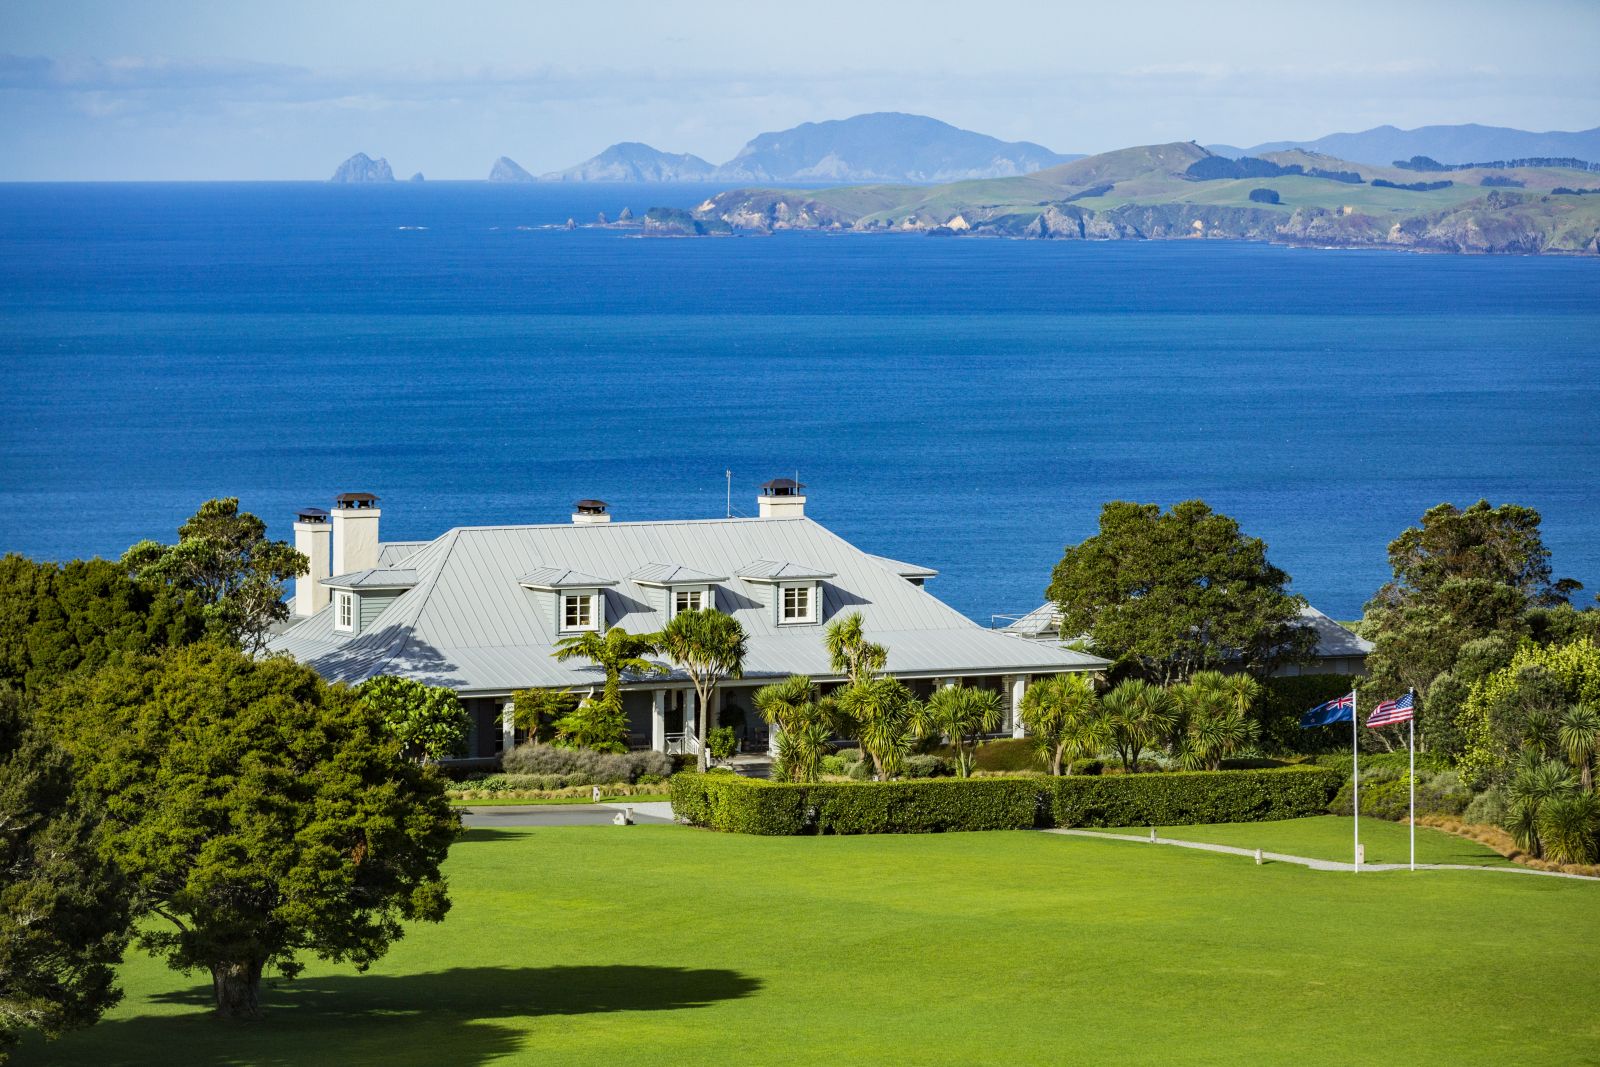 Exterior shot of Kauri Cliffs Lodge in New Zealand with green lawns in front and the Pacific Ocean and mountains in the background